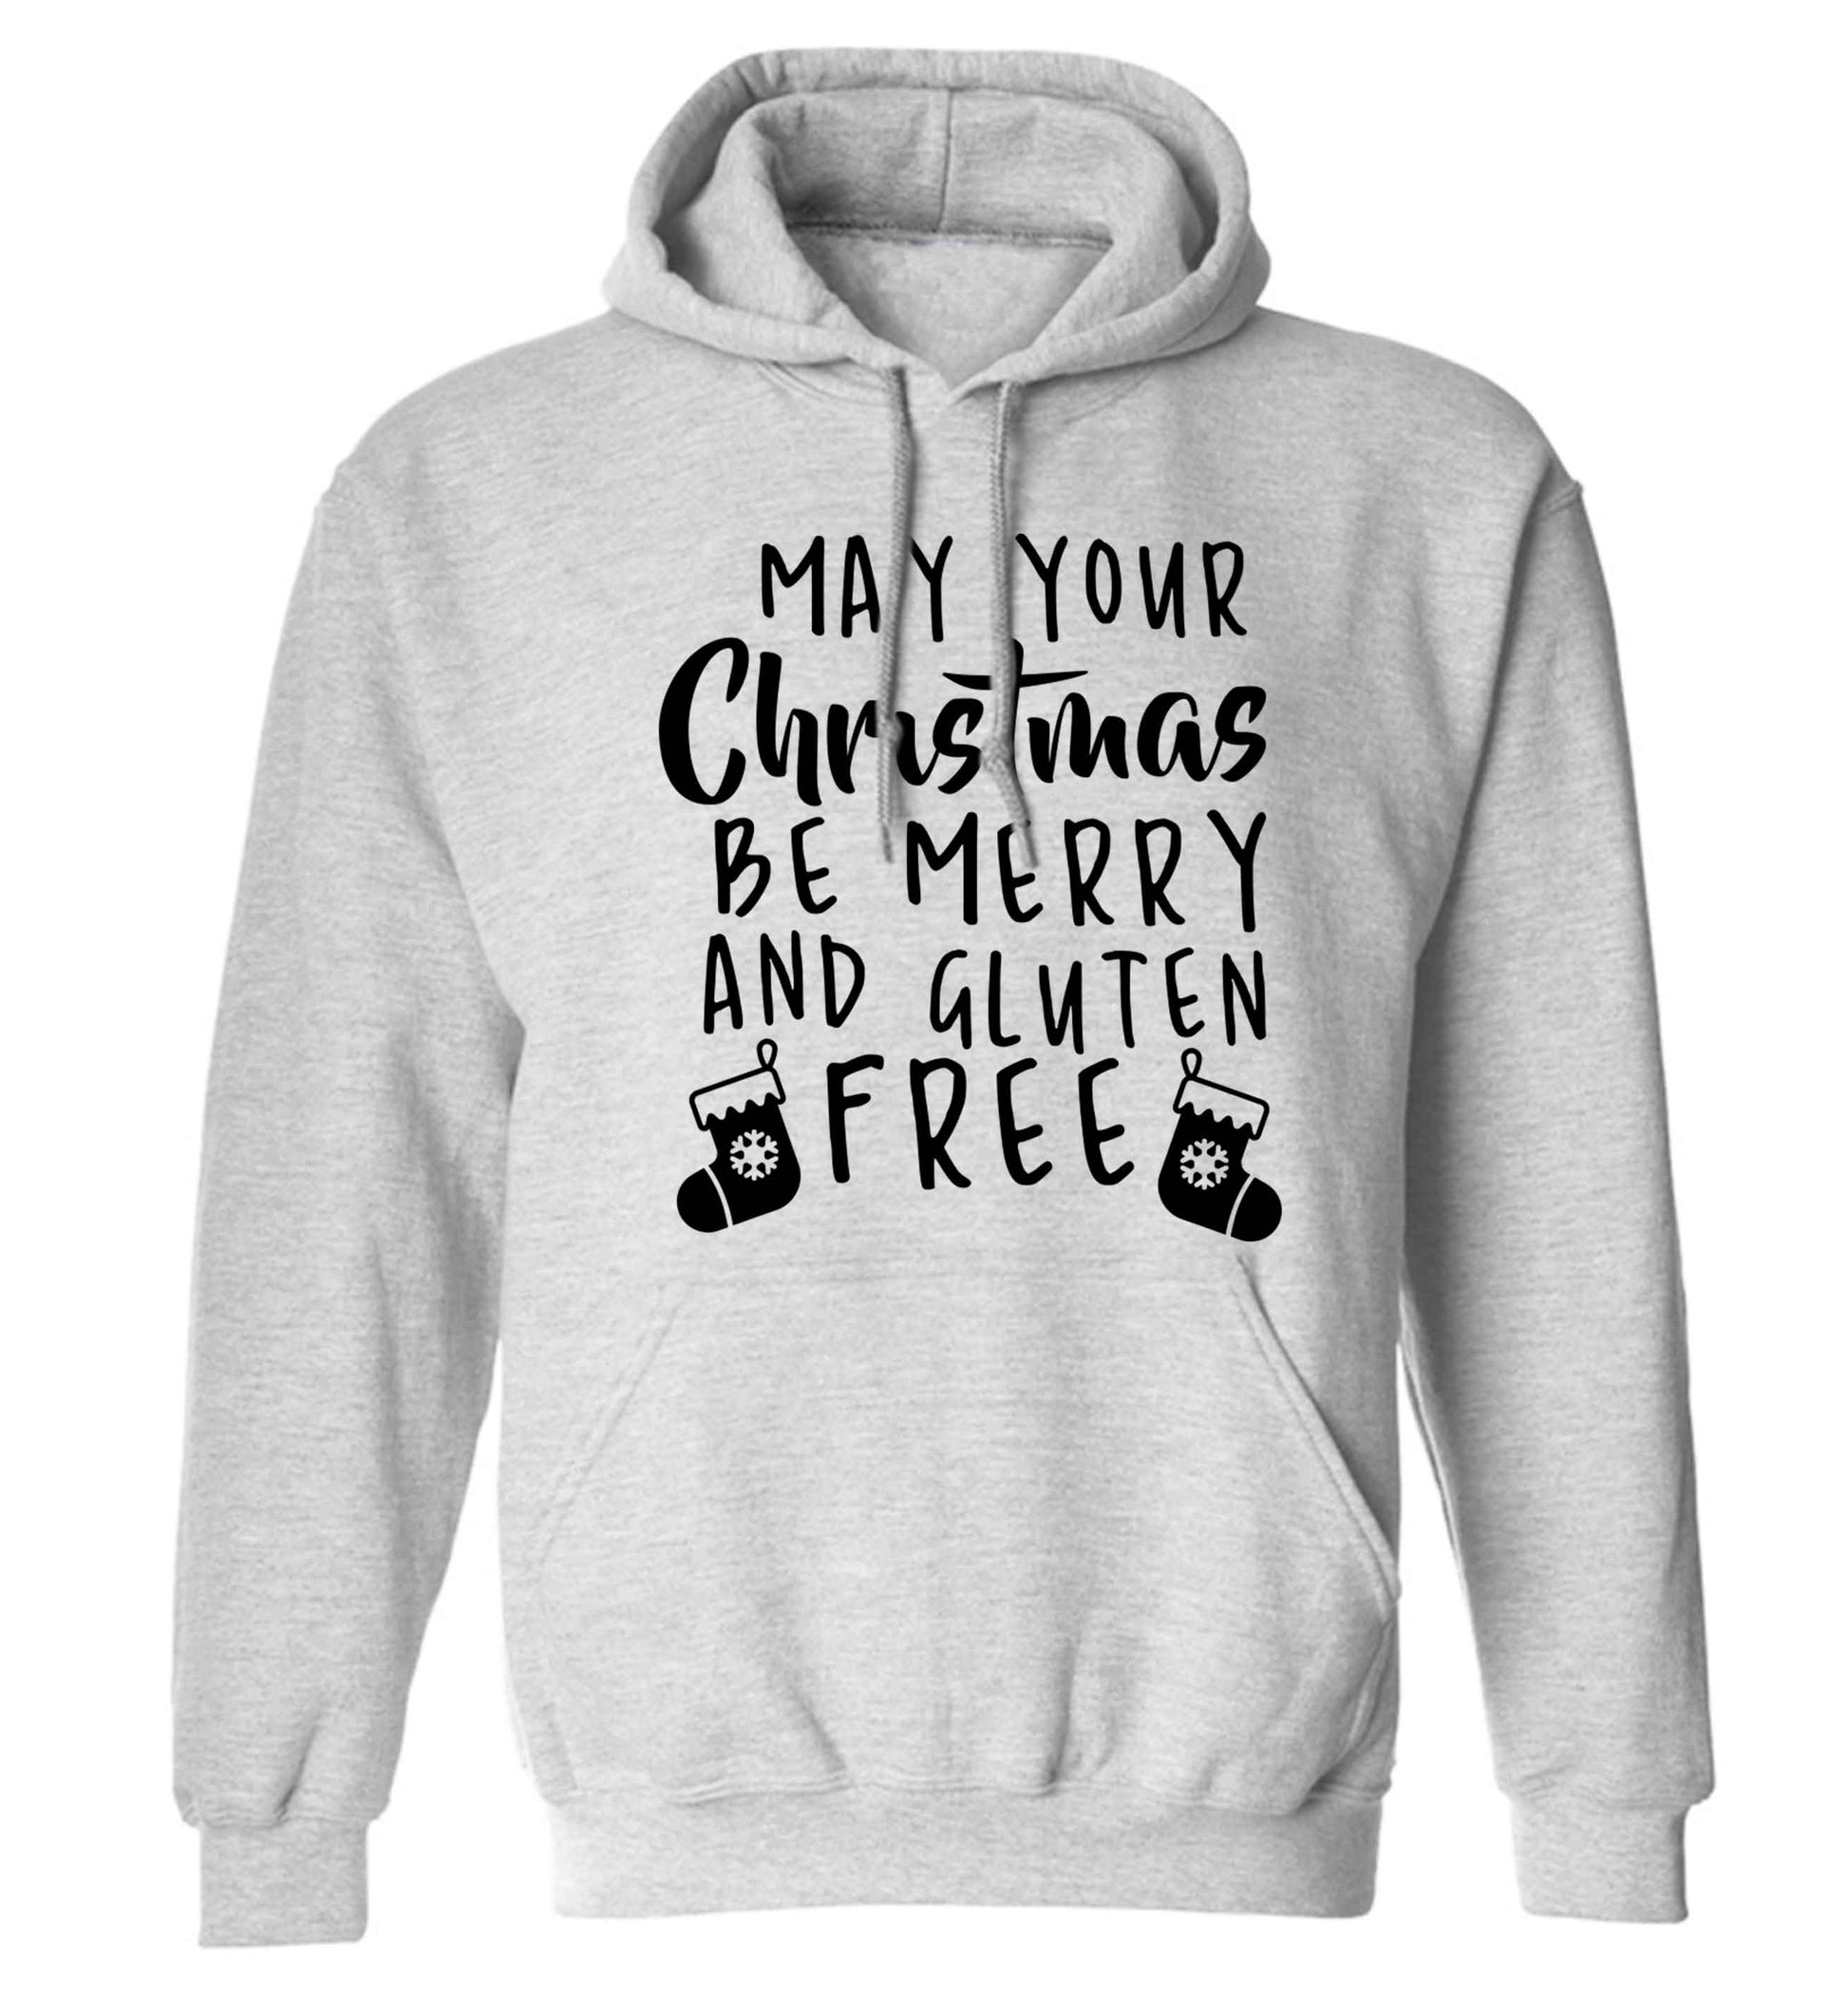 May your Christmas be merry and gluten free adults unisex grey hoodie 2XL